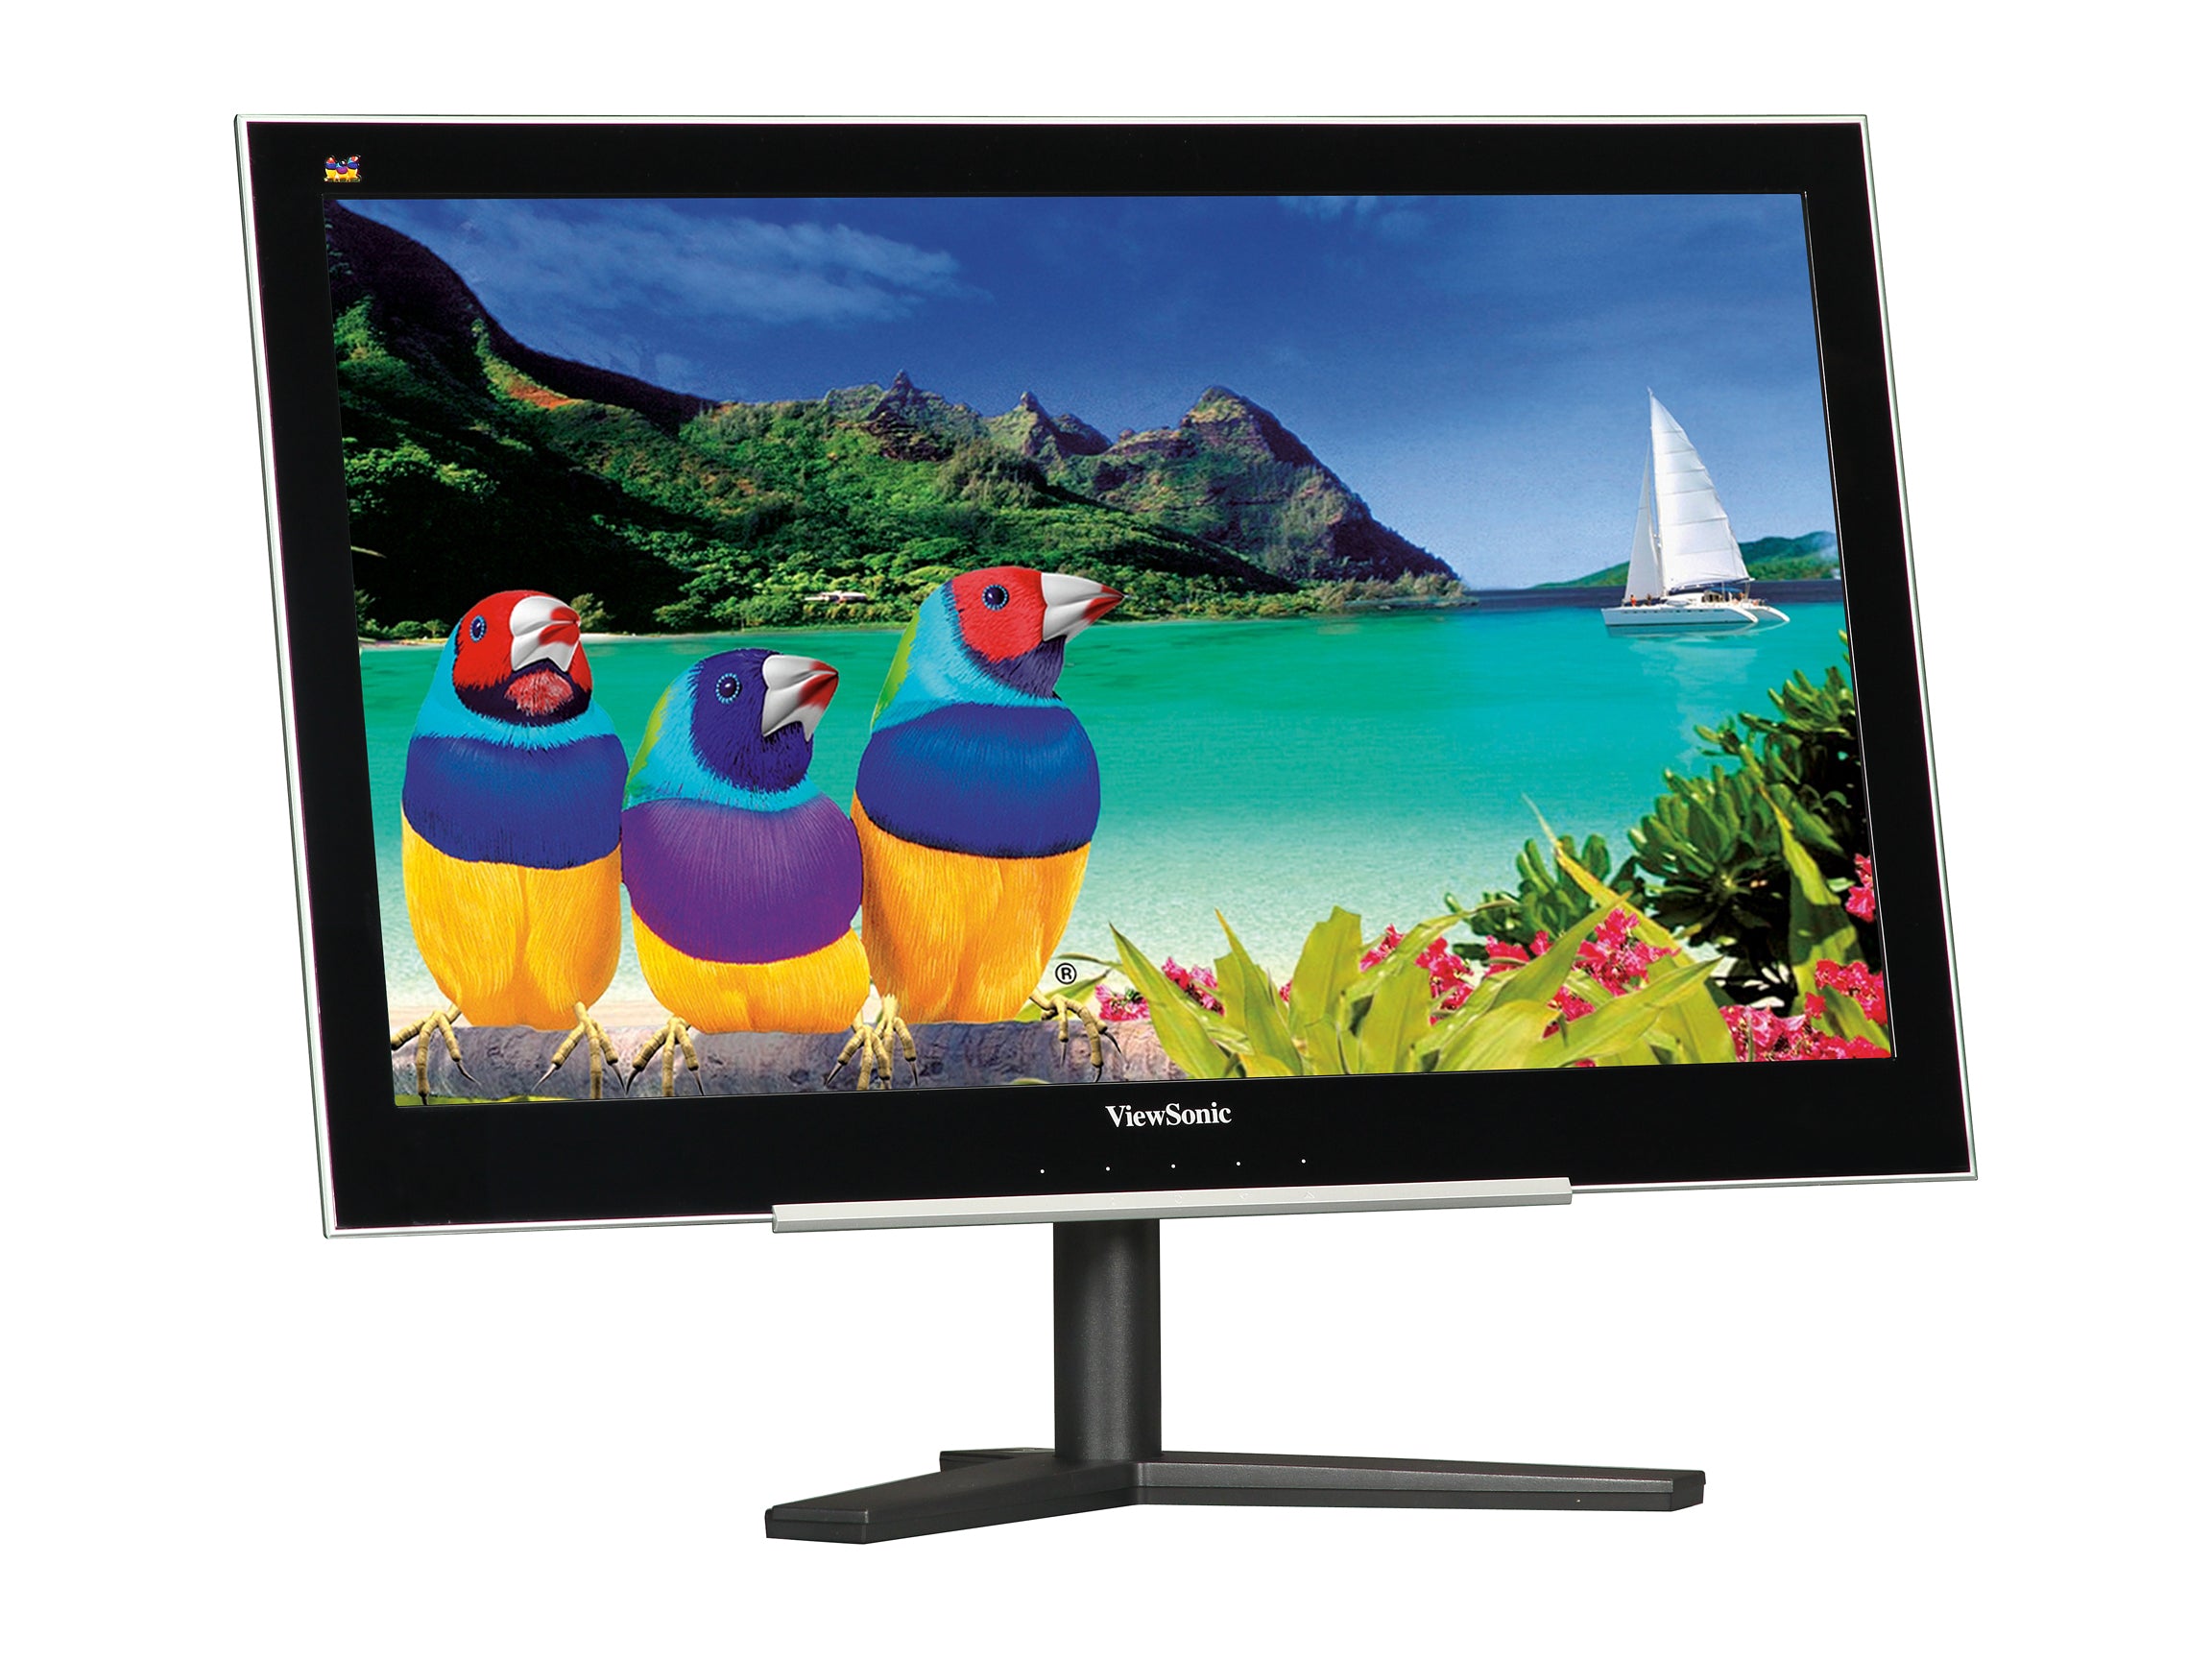 ViewSonic VX2260S-LED-S 22" Widescreen Ultra Thin IPS Panel LED Monitor Certified Refurbished